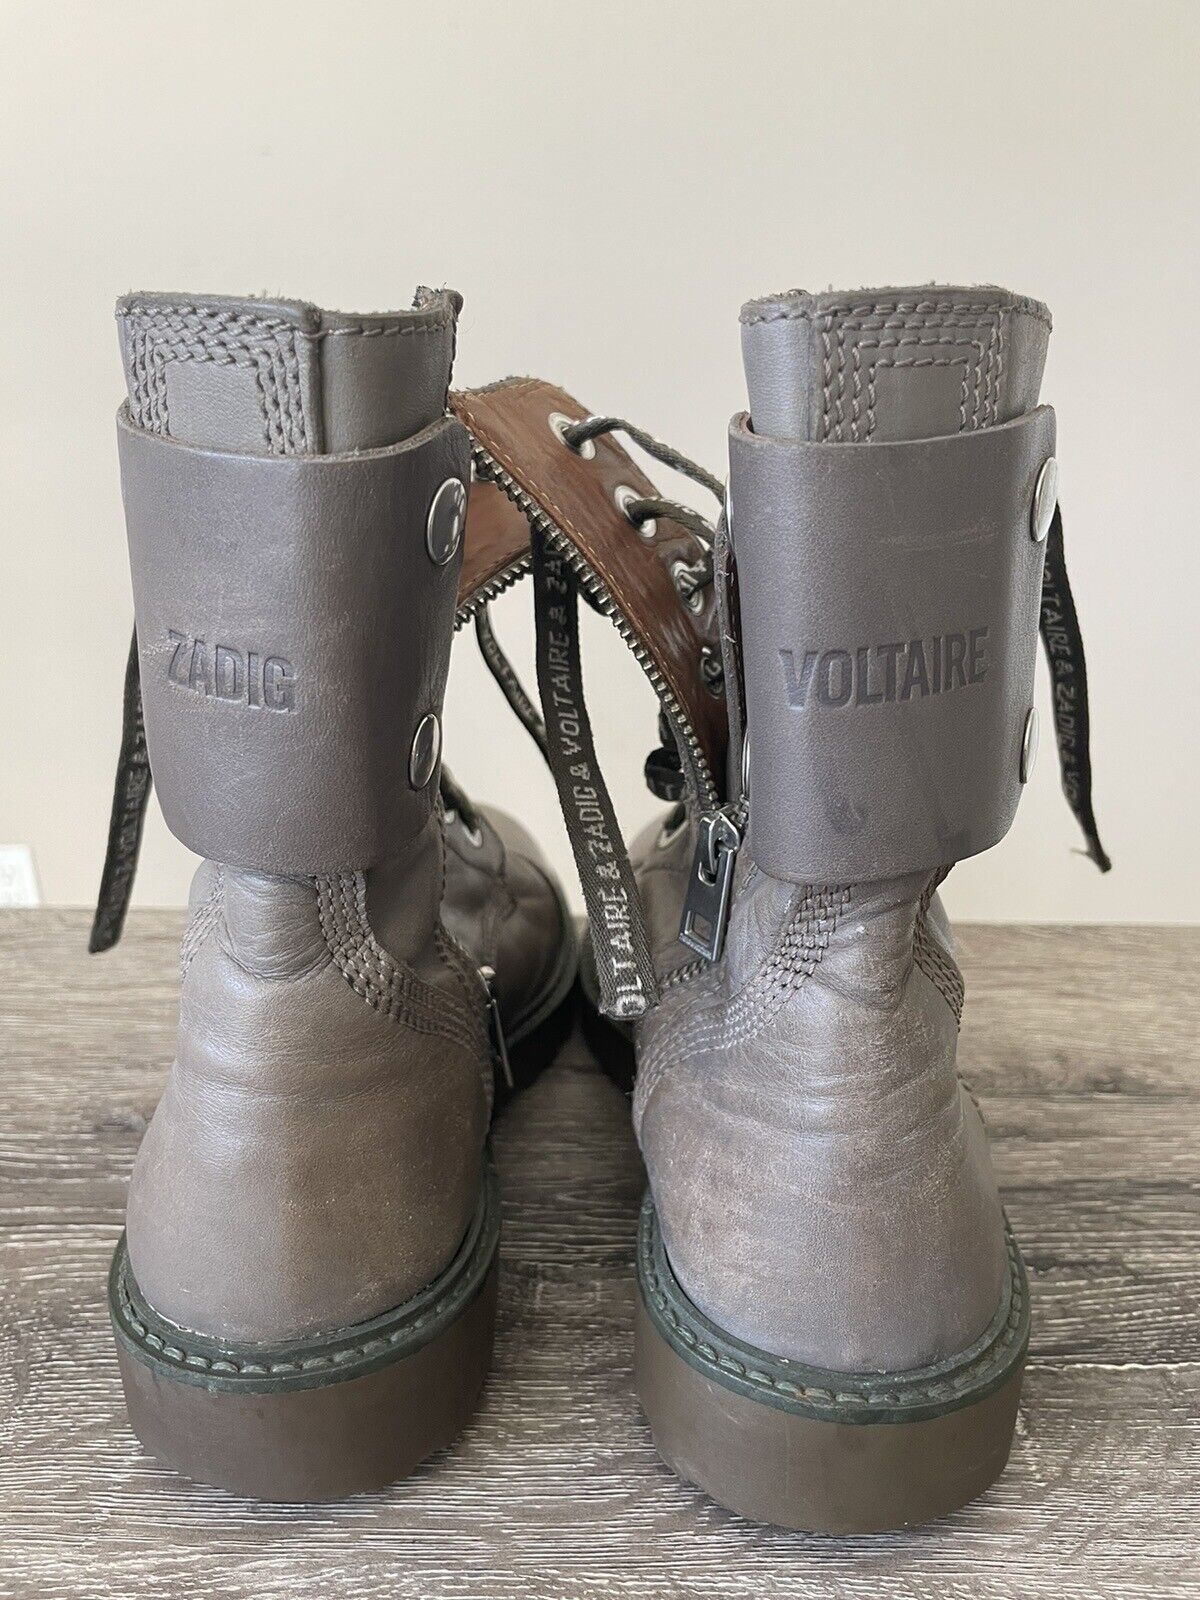 Zadig & Voltaire Woman’s Boots - image 4